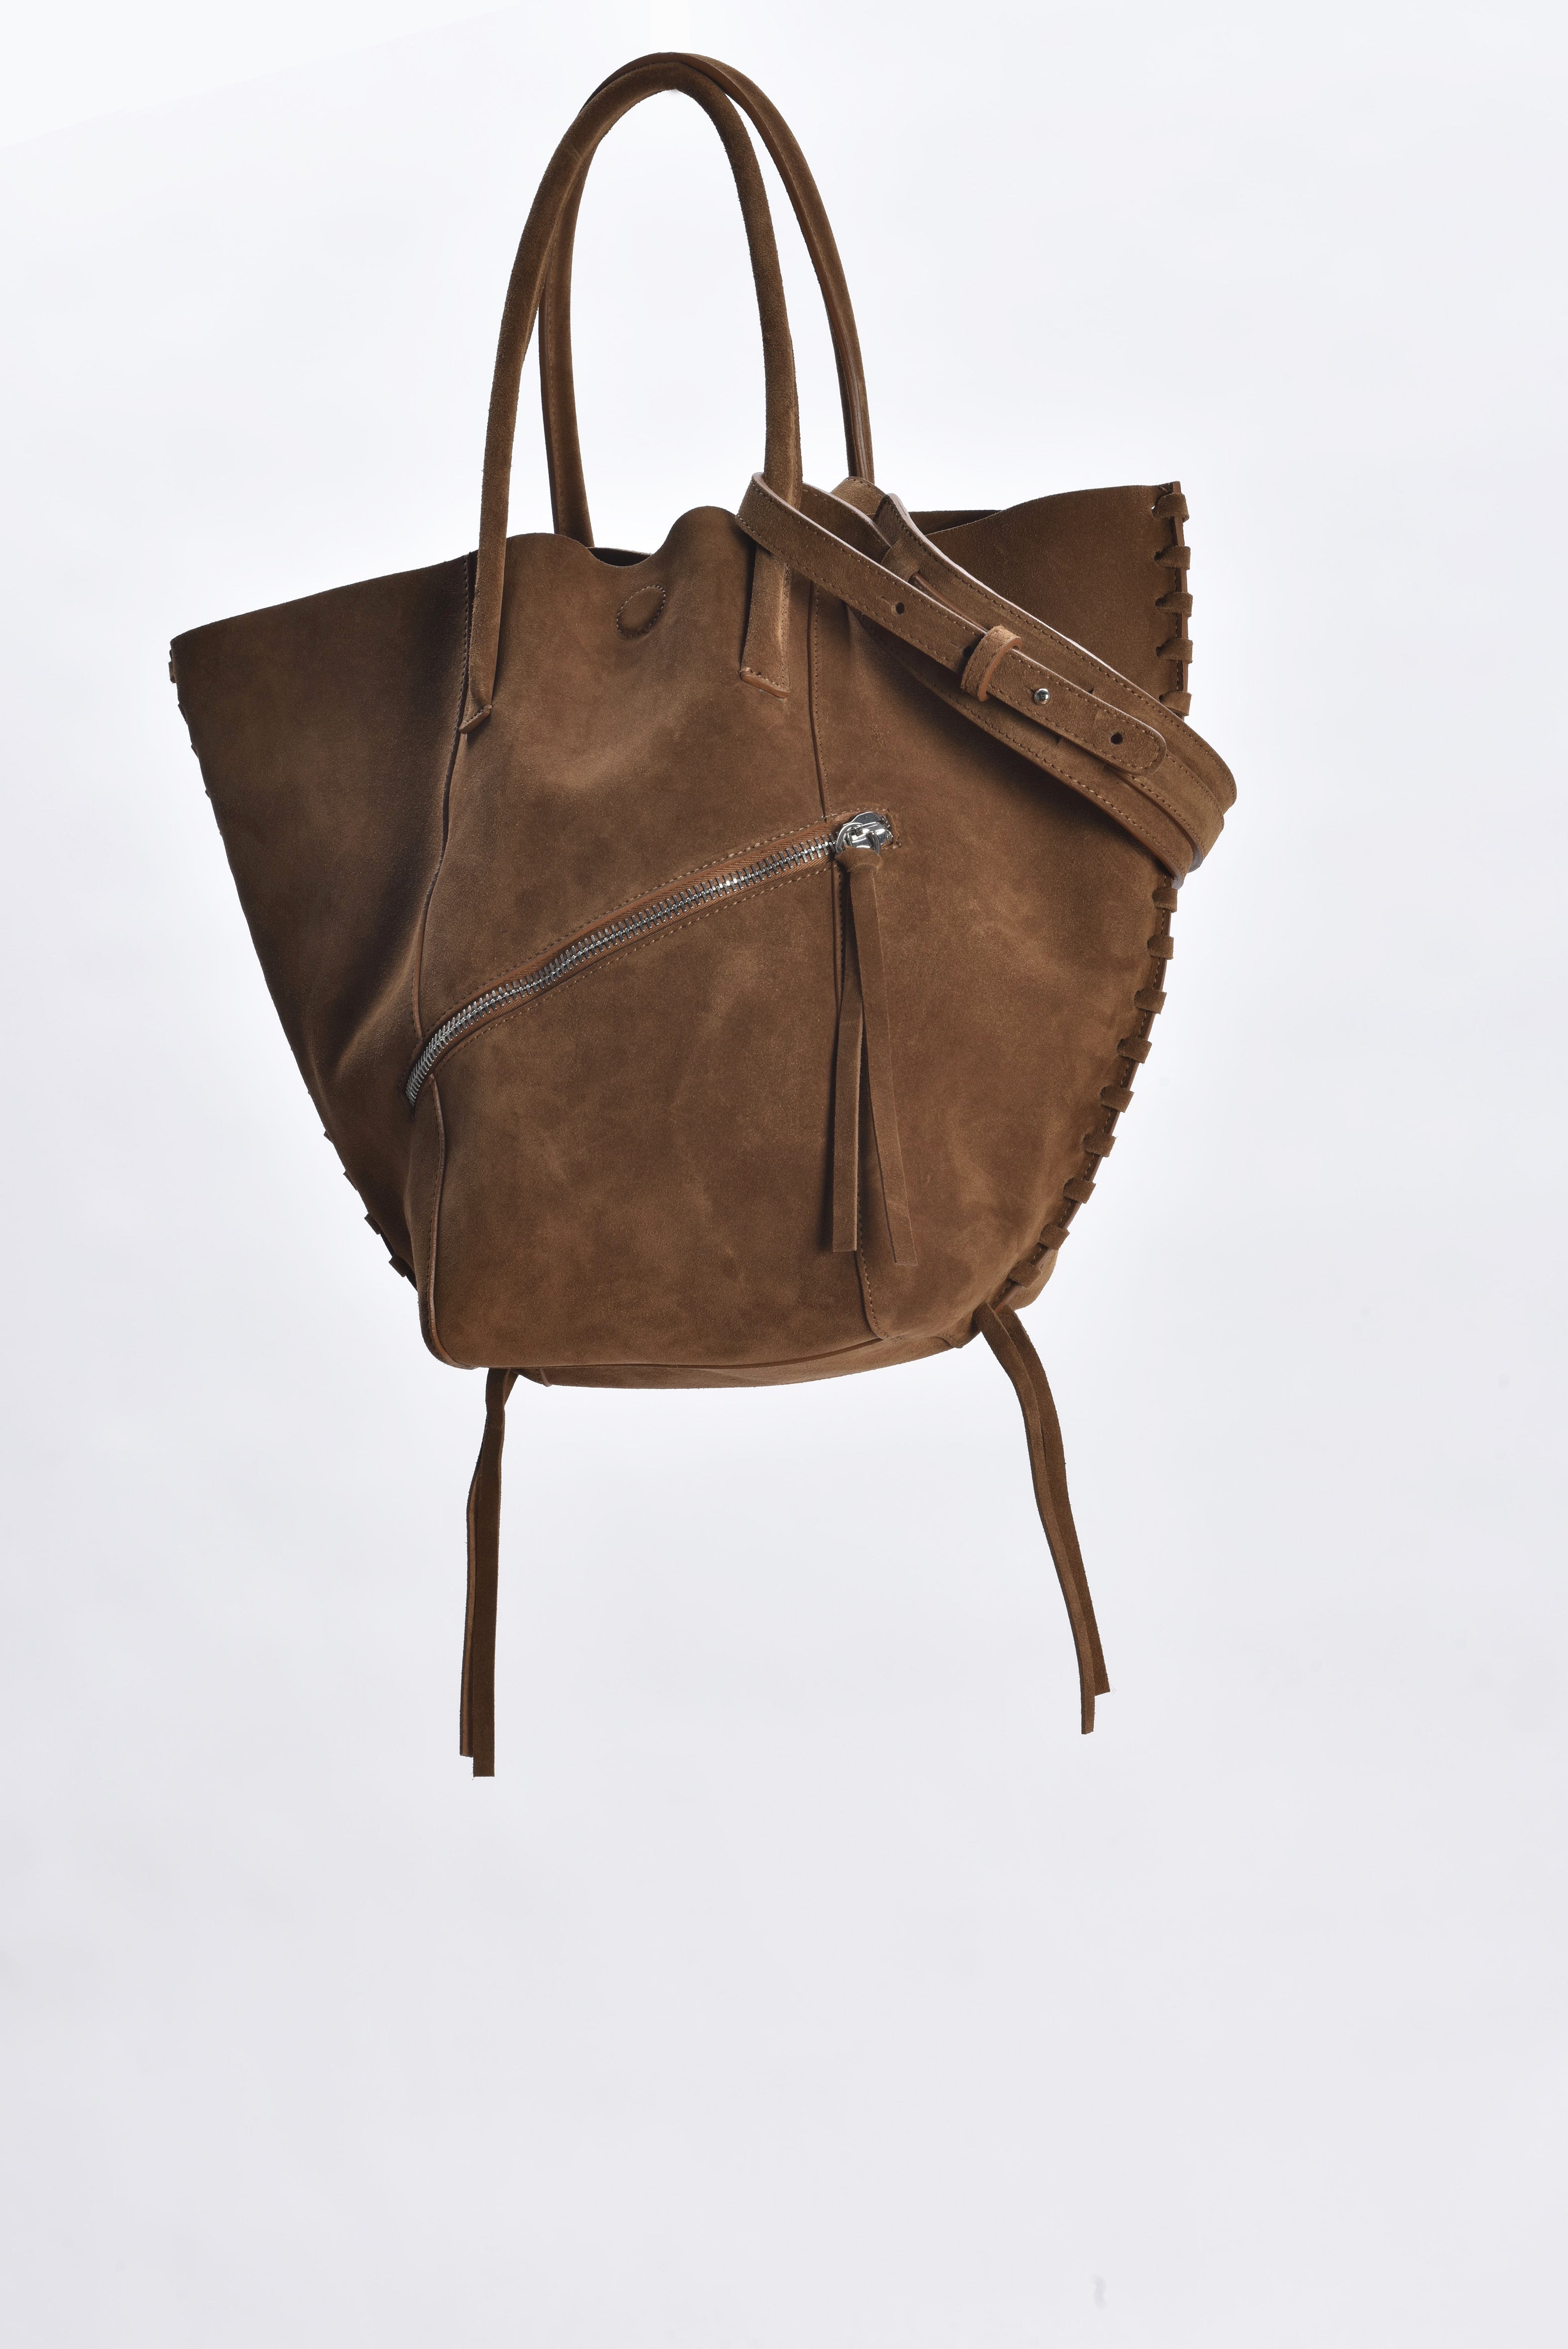 MATALY_ Mataly shopperbag in Golden Brown by Palmerston PALMERSTON_